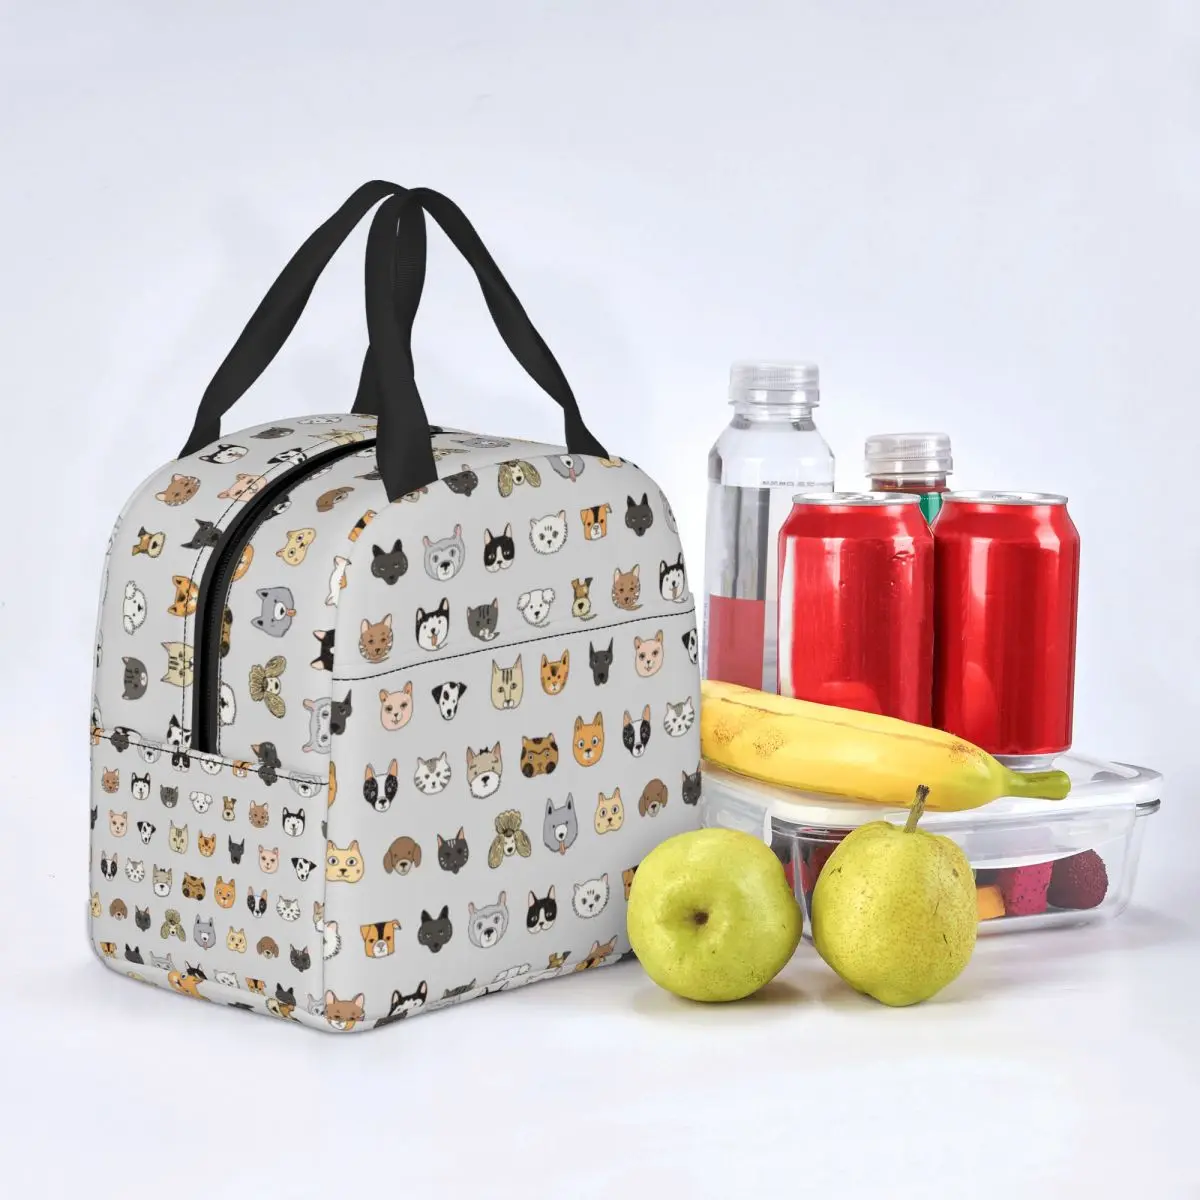 Cute Animal Cat Lunch Bag Waterproof Insulated Canvas Cooler Thermal Picnic Travel Tote for Women Girl